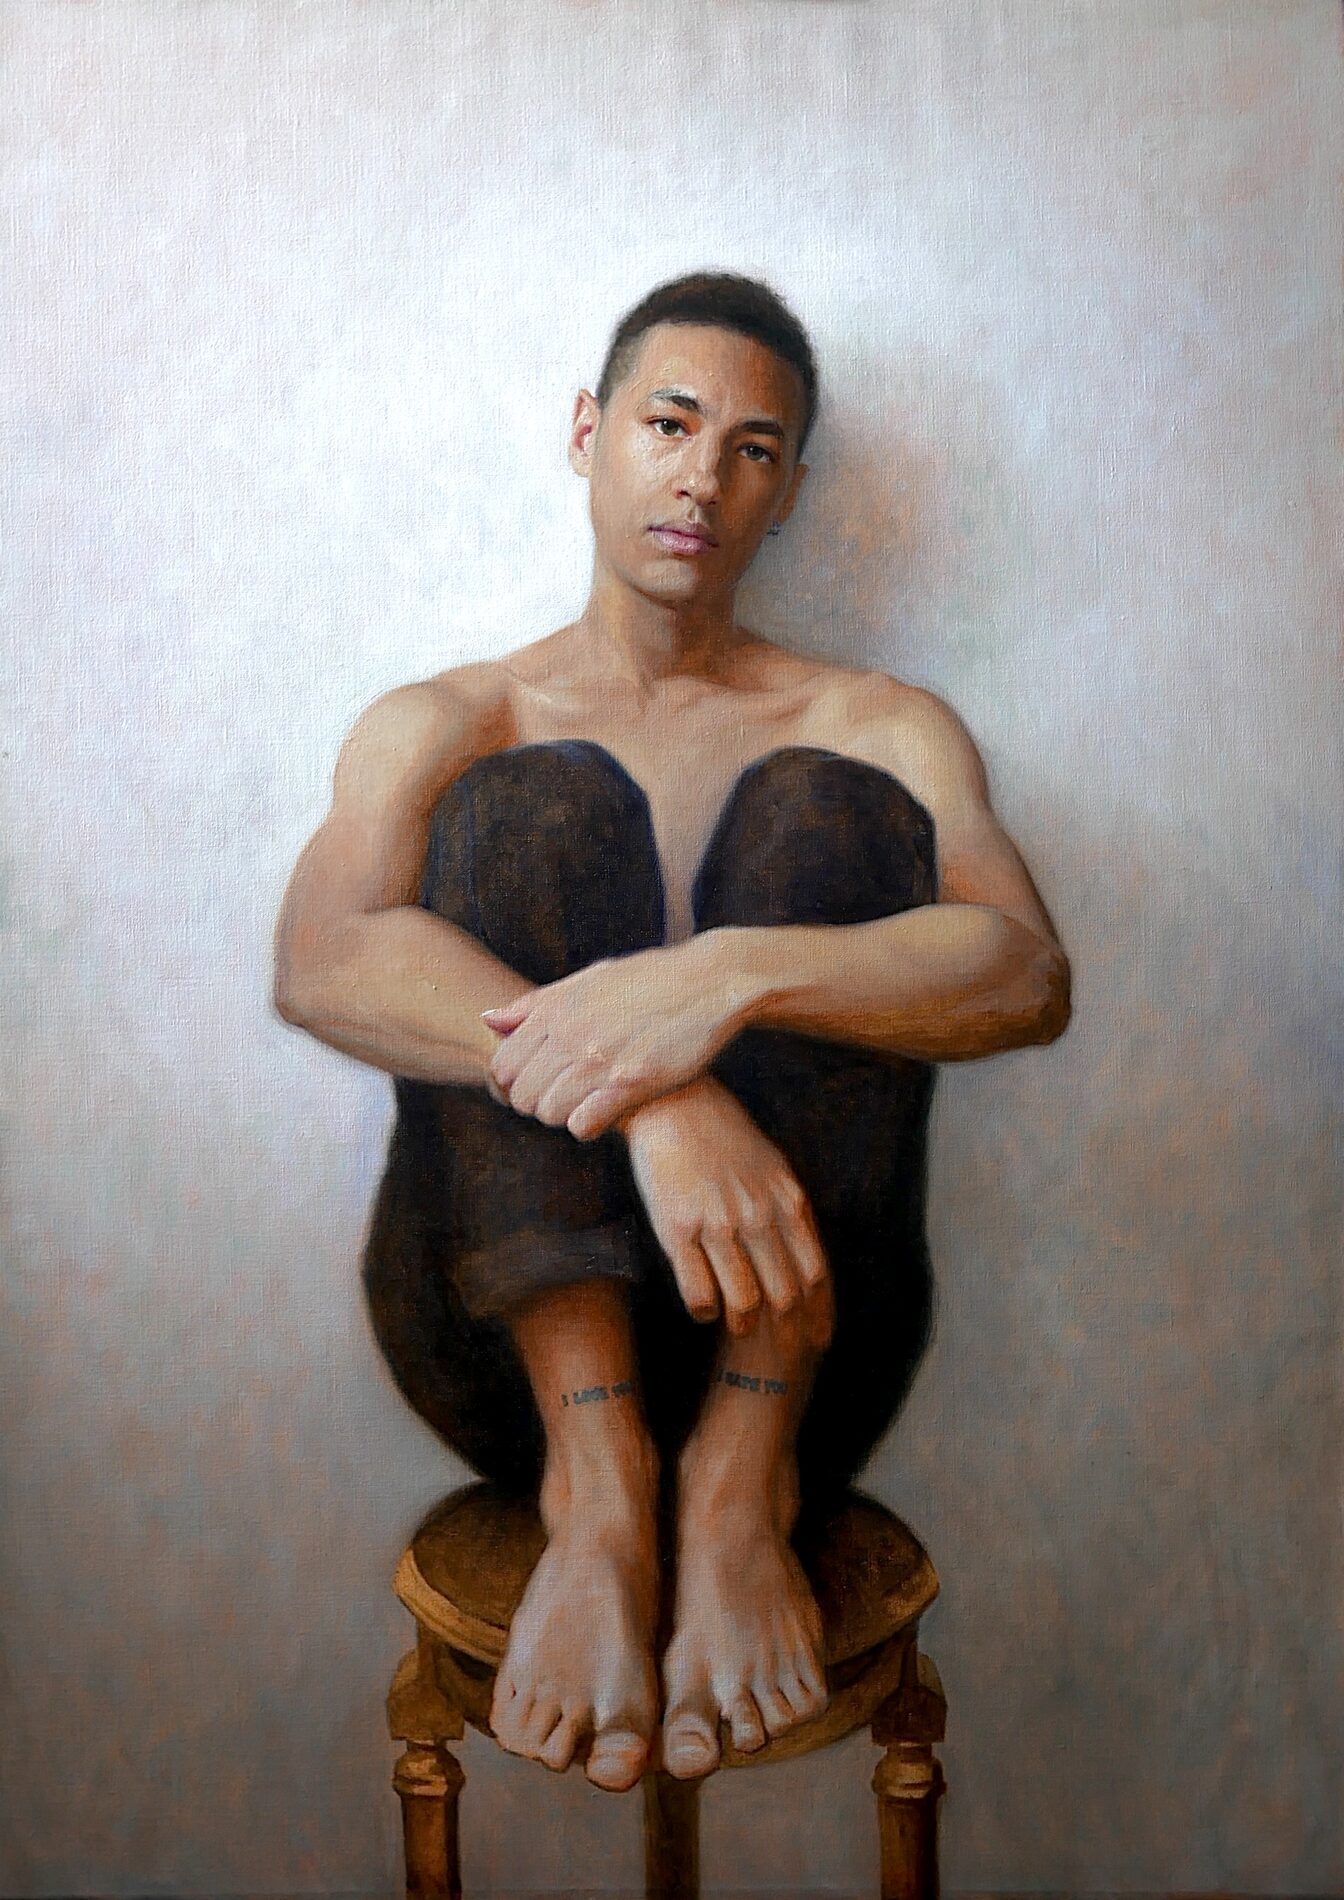 Shirtless young man sitting on a stool, holding his knees to his chest.